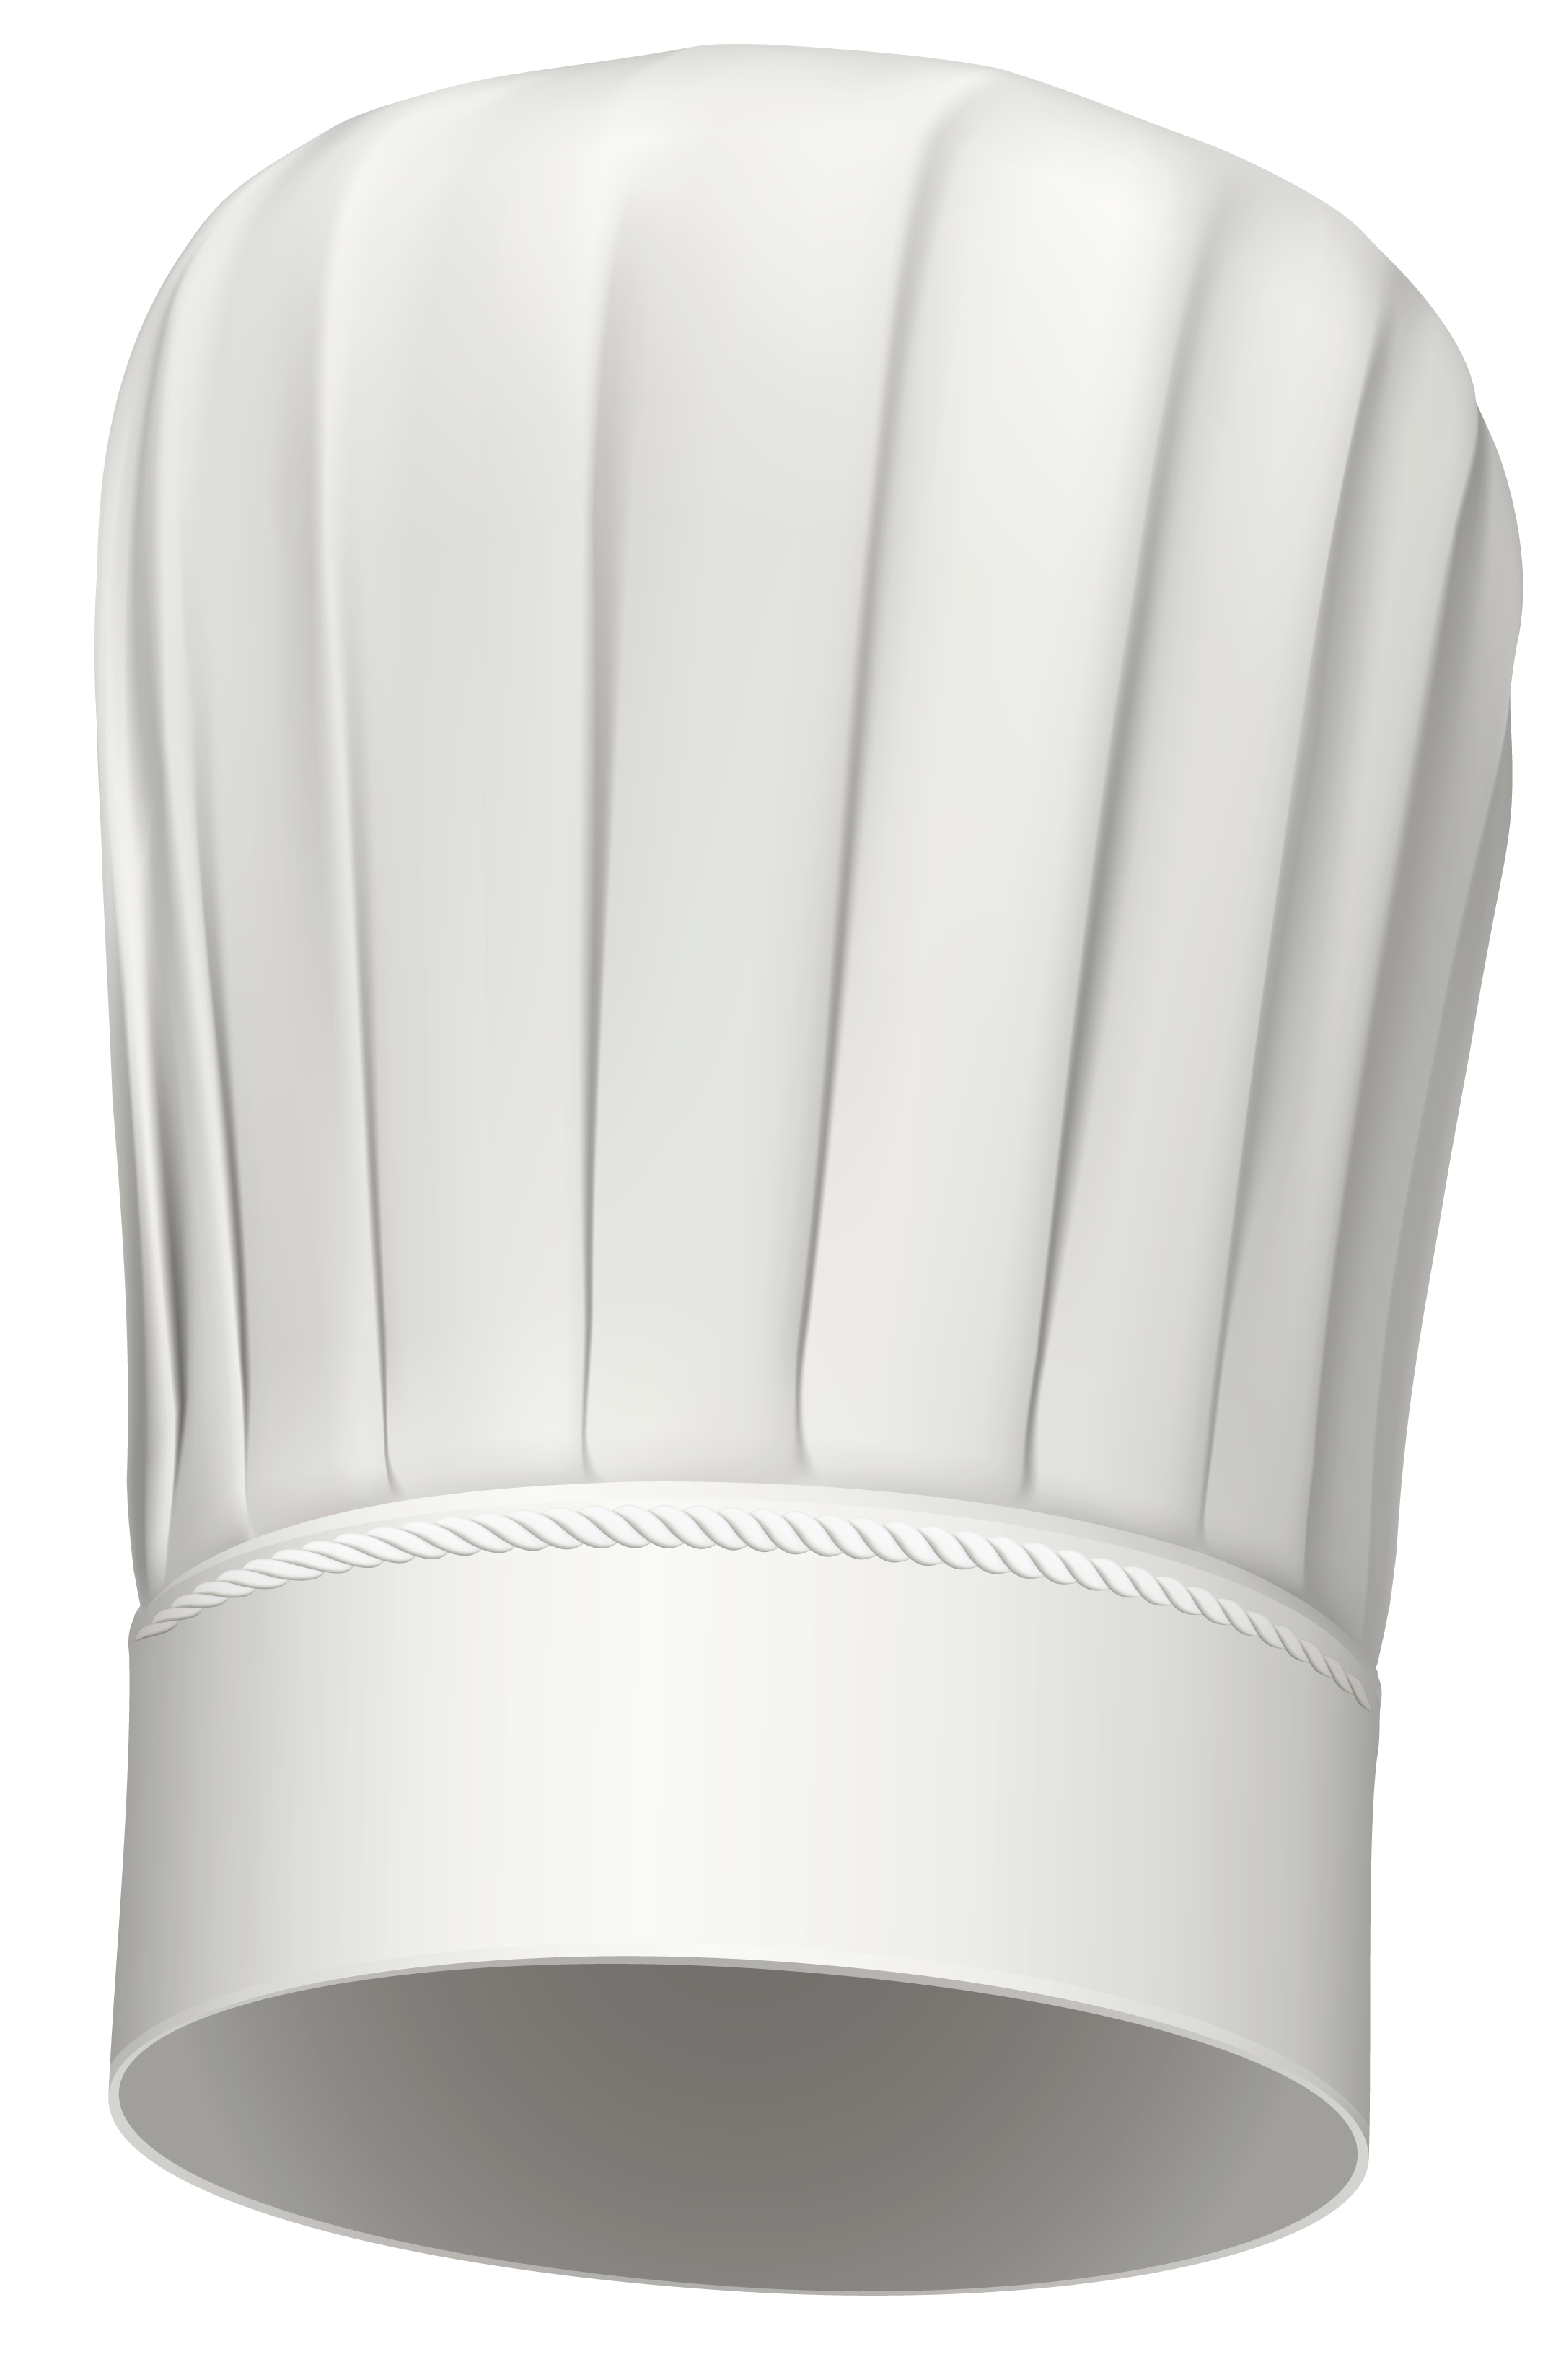 clipart chef hat free - photo #33